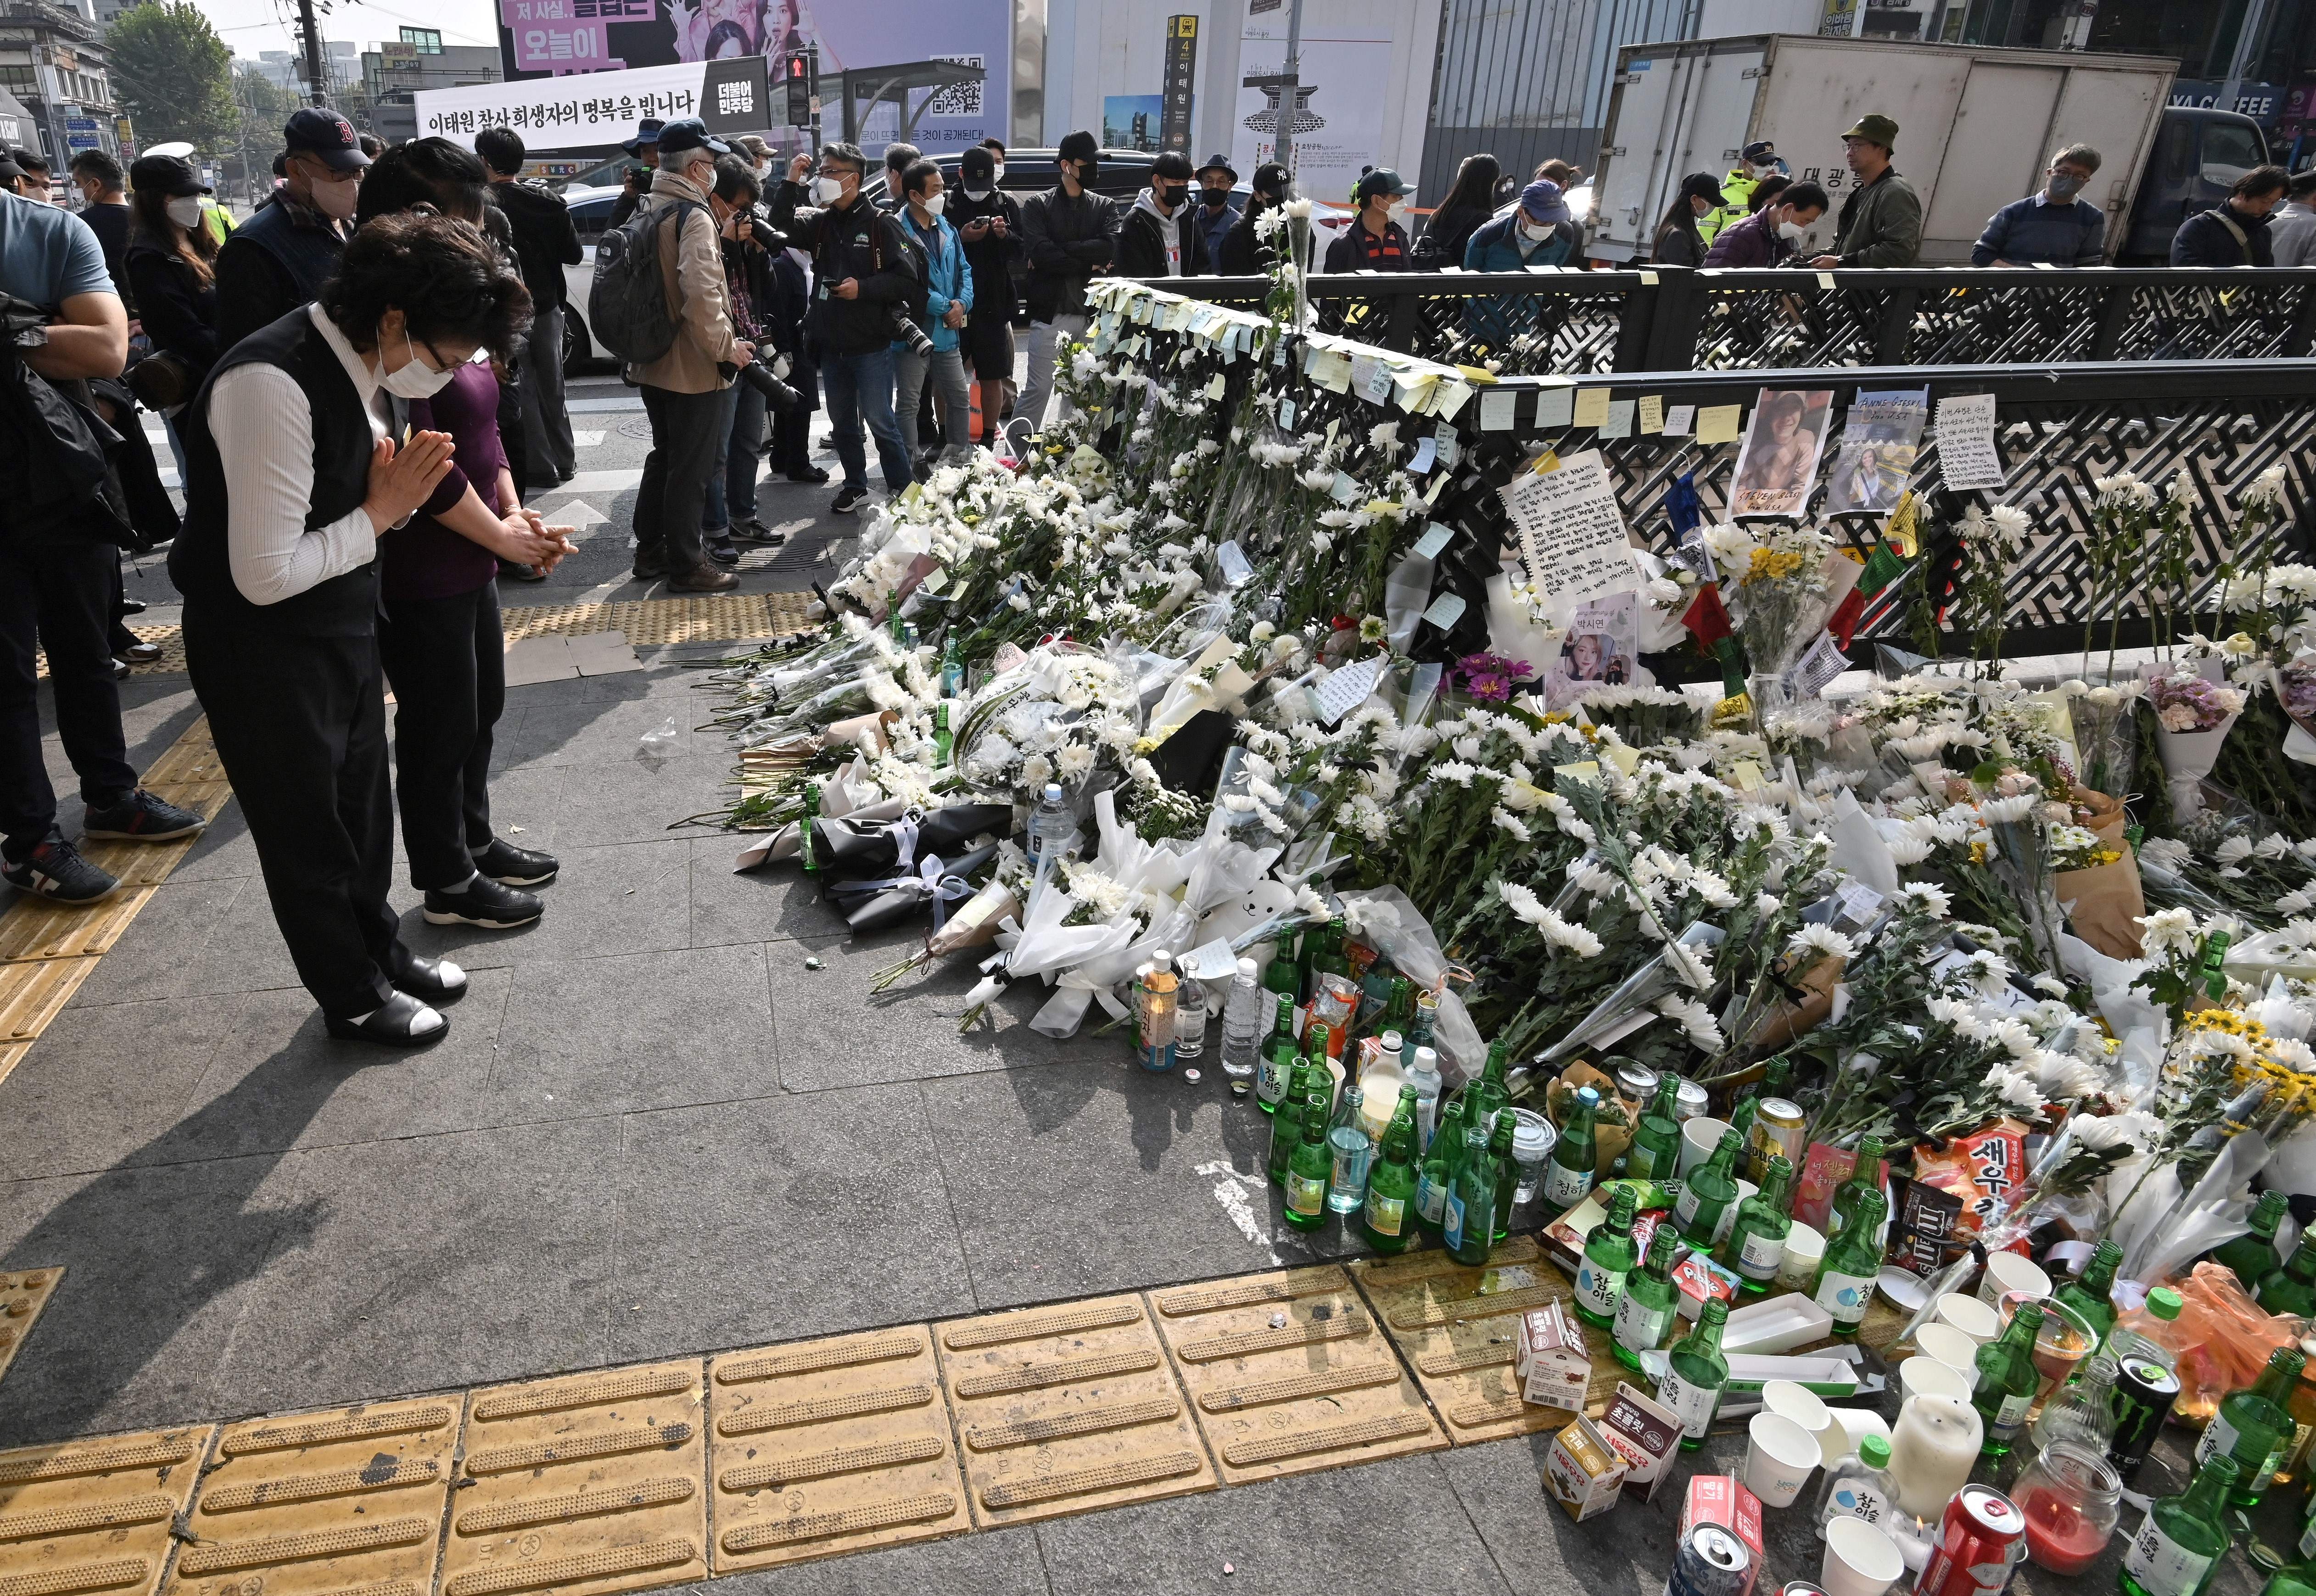 Mourners pay tributes at a makeshift memorial for the victims of the deadly Halloween crowd surge, outside a subway station in the district of Itaewon in Seoul